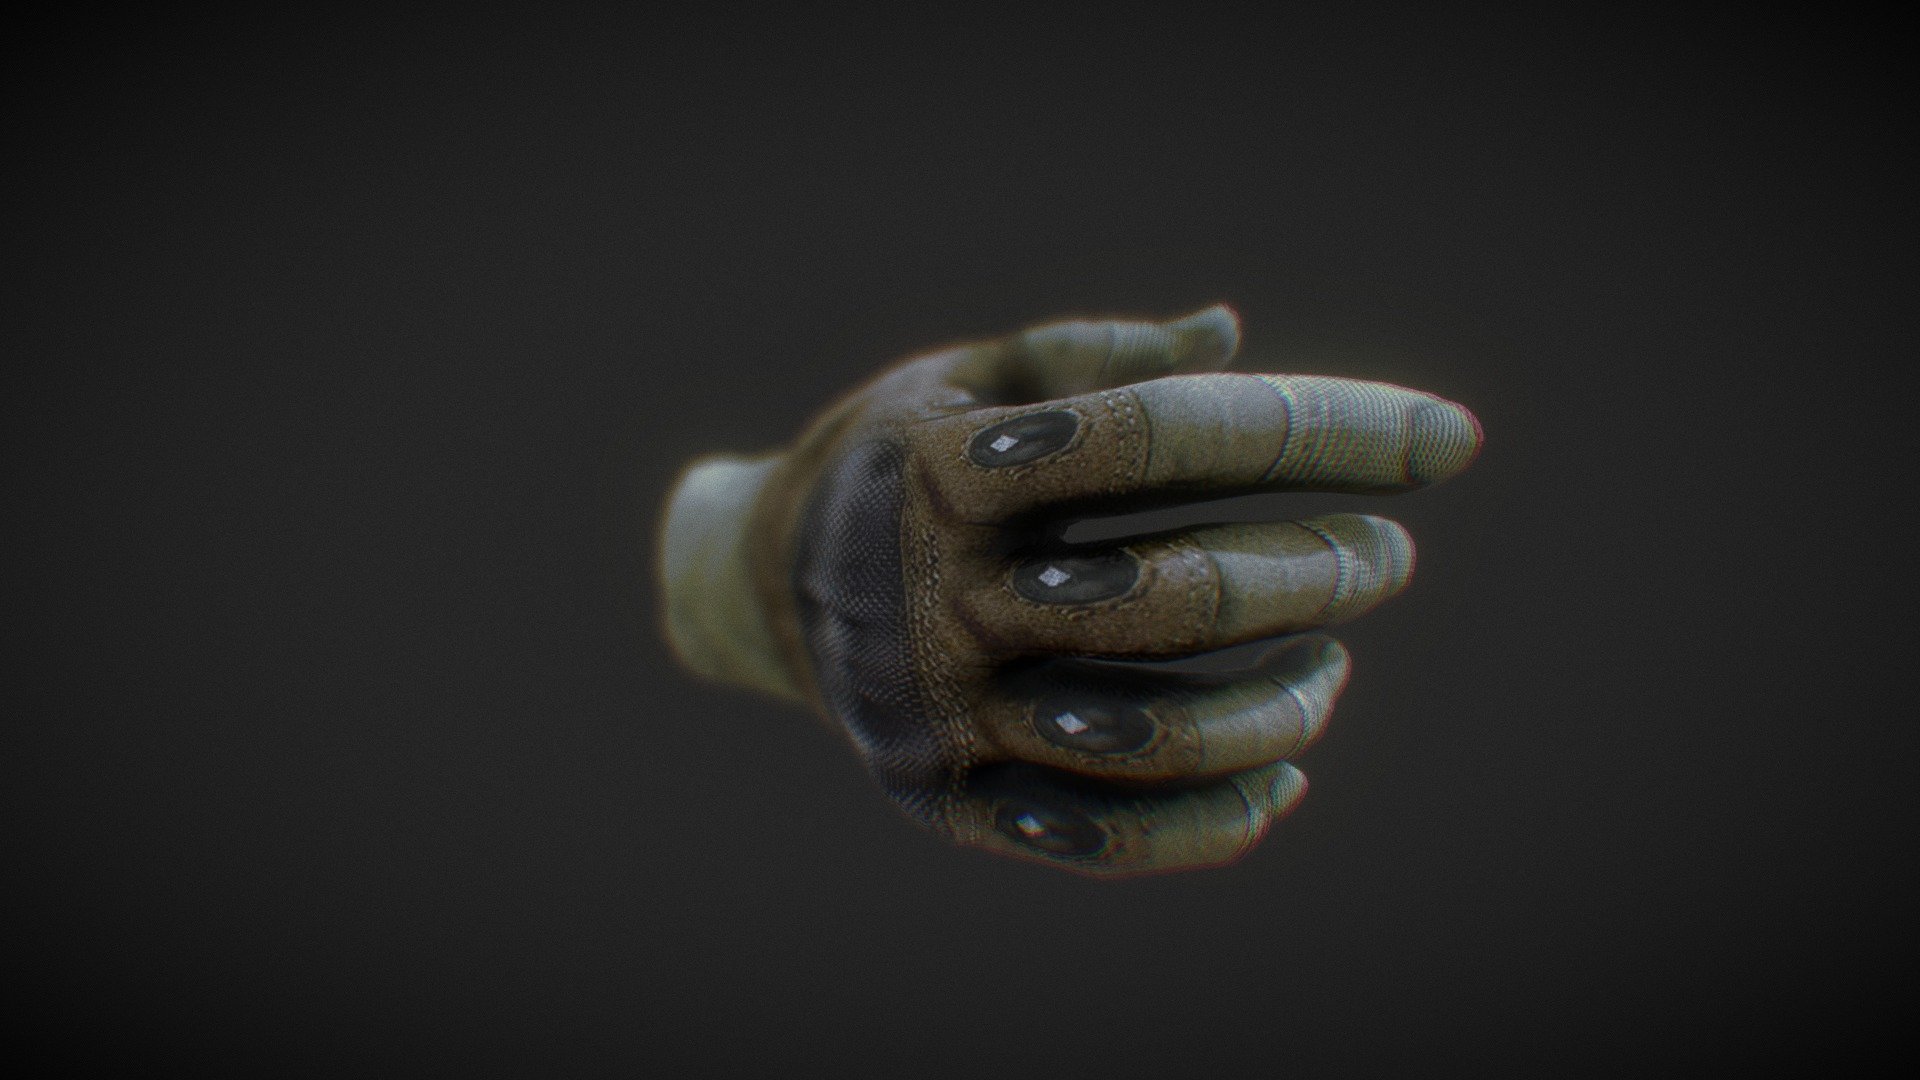 VR Hand Glove made in Blender 
Used in my Game Fly XR for Oculus Quest - VR Hand Glove - Download Free 3D model by Erick Marin (@erickmarin221) 3d model